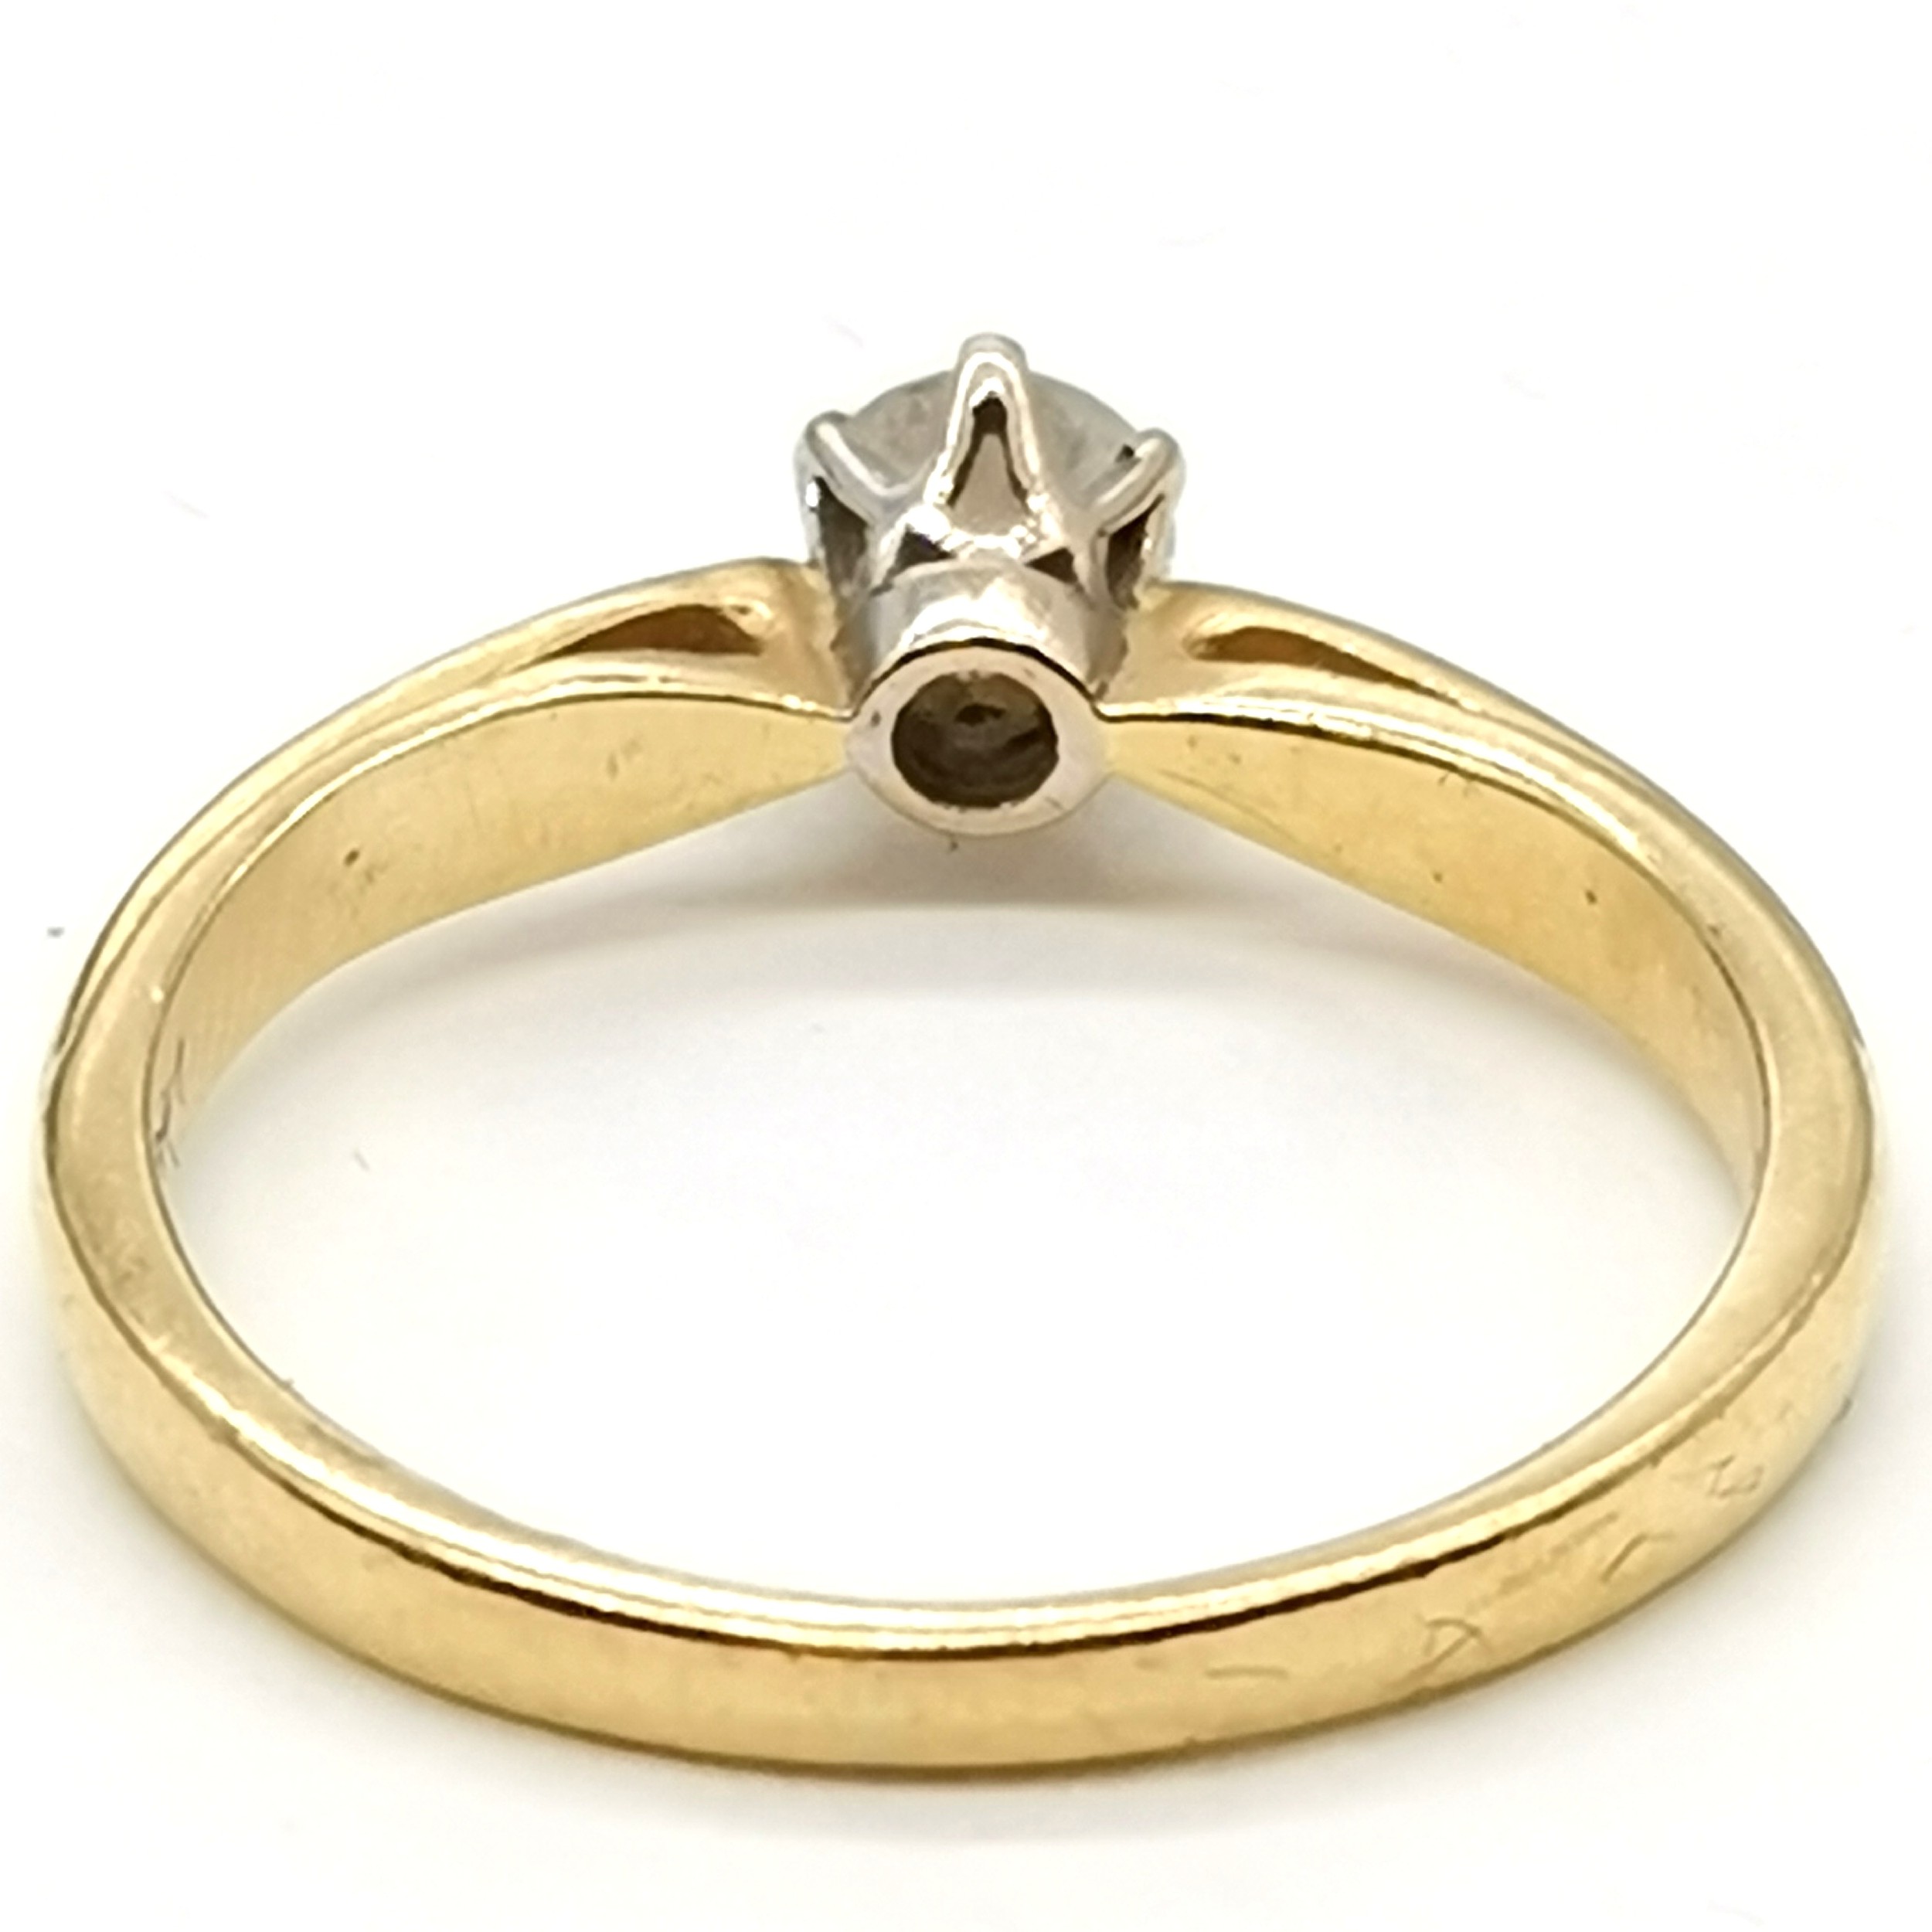 18ct hallmarked gold solitaire diamond ring - size L½ & 2.4g total weight ~ the diamond is approx - Image 2 of 4